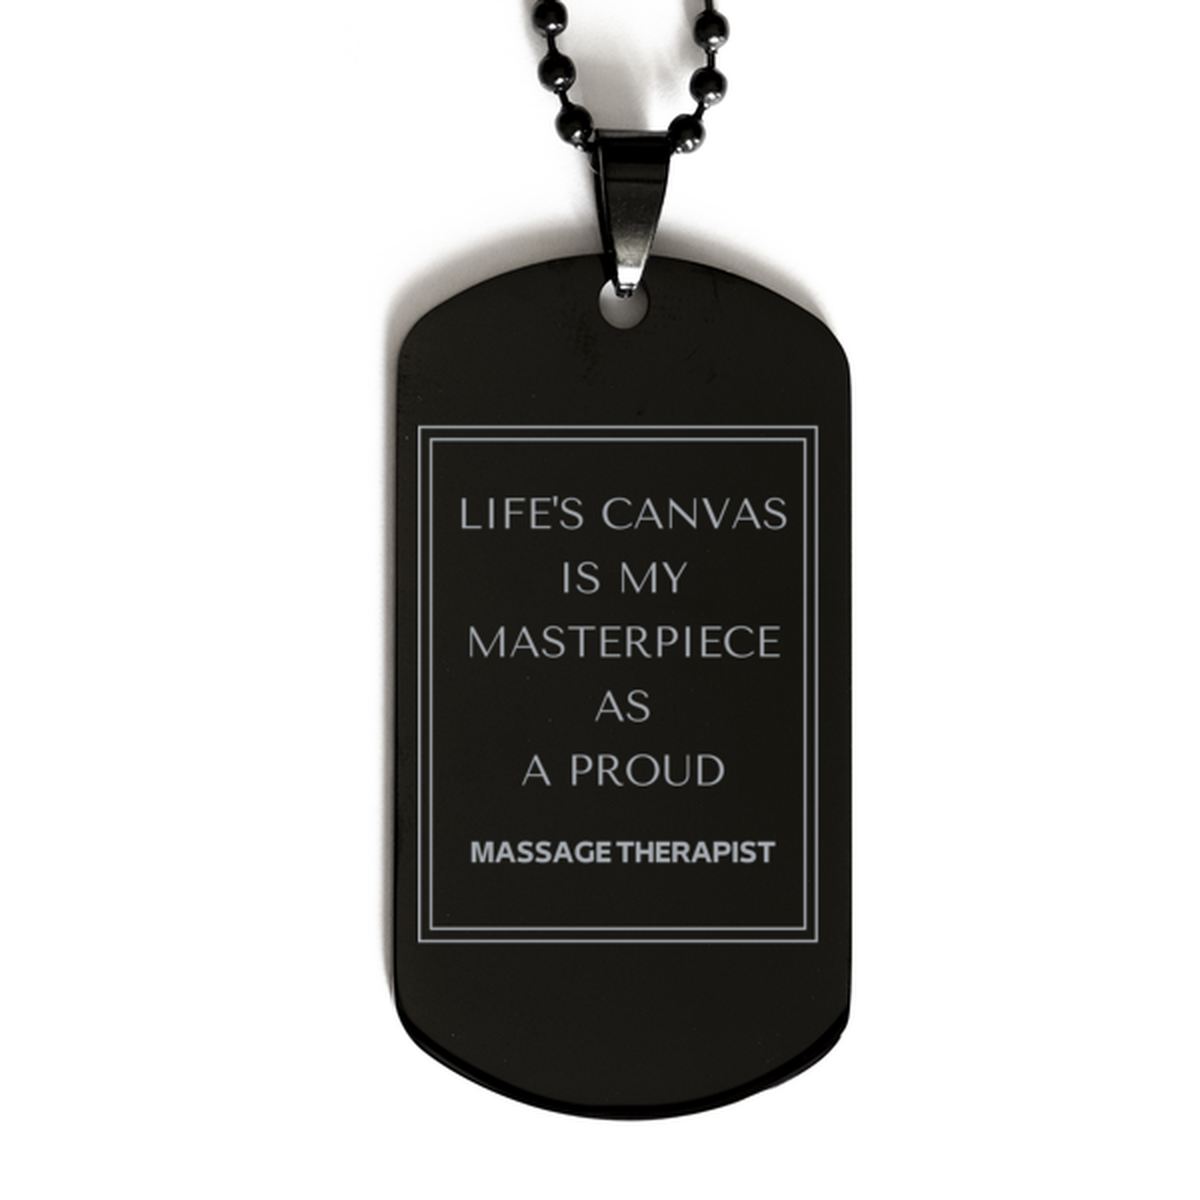 Proud Massage Therapist Gifts, Life's canvas is my masterpiece, Epic Birthday Christmas Unique Black Dog Tag For Massage Therapist, Coworkers, Men, Women, Friends